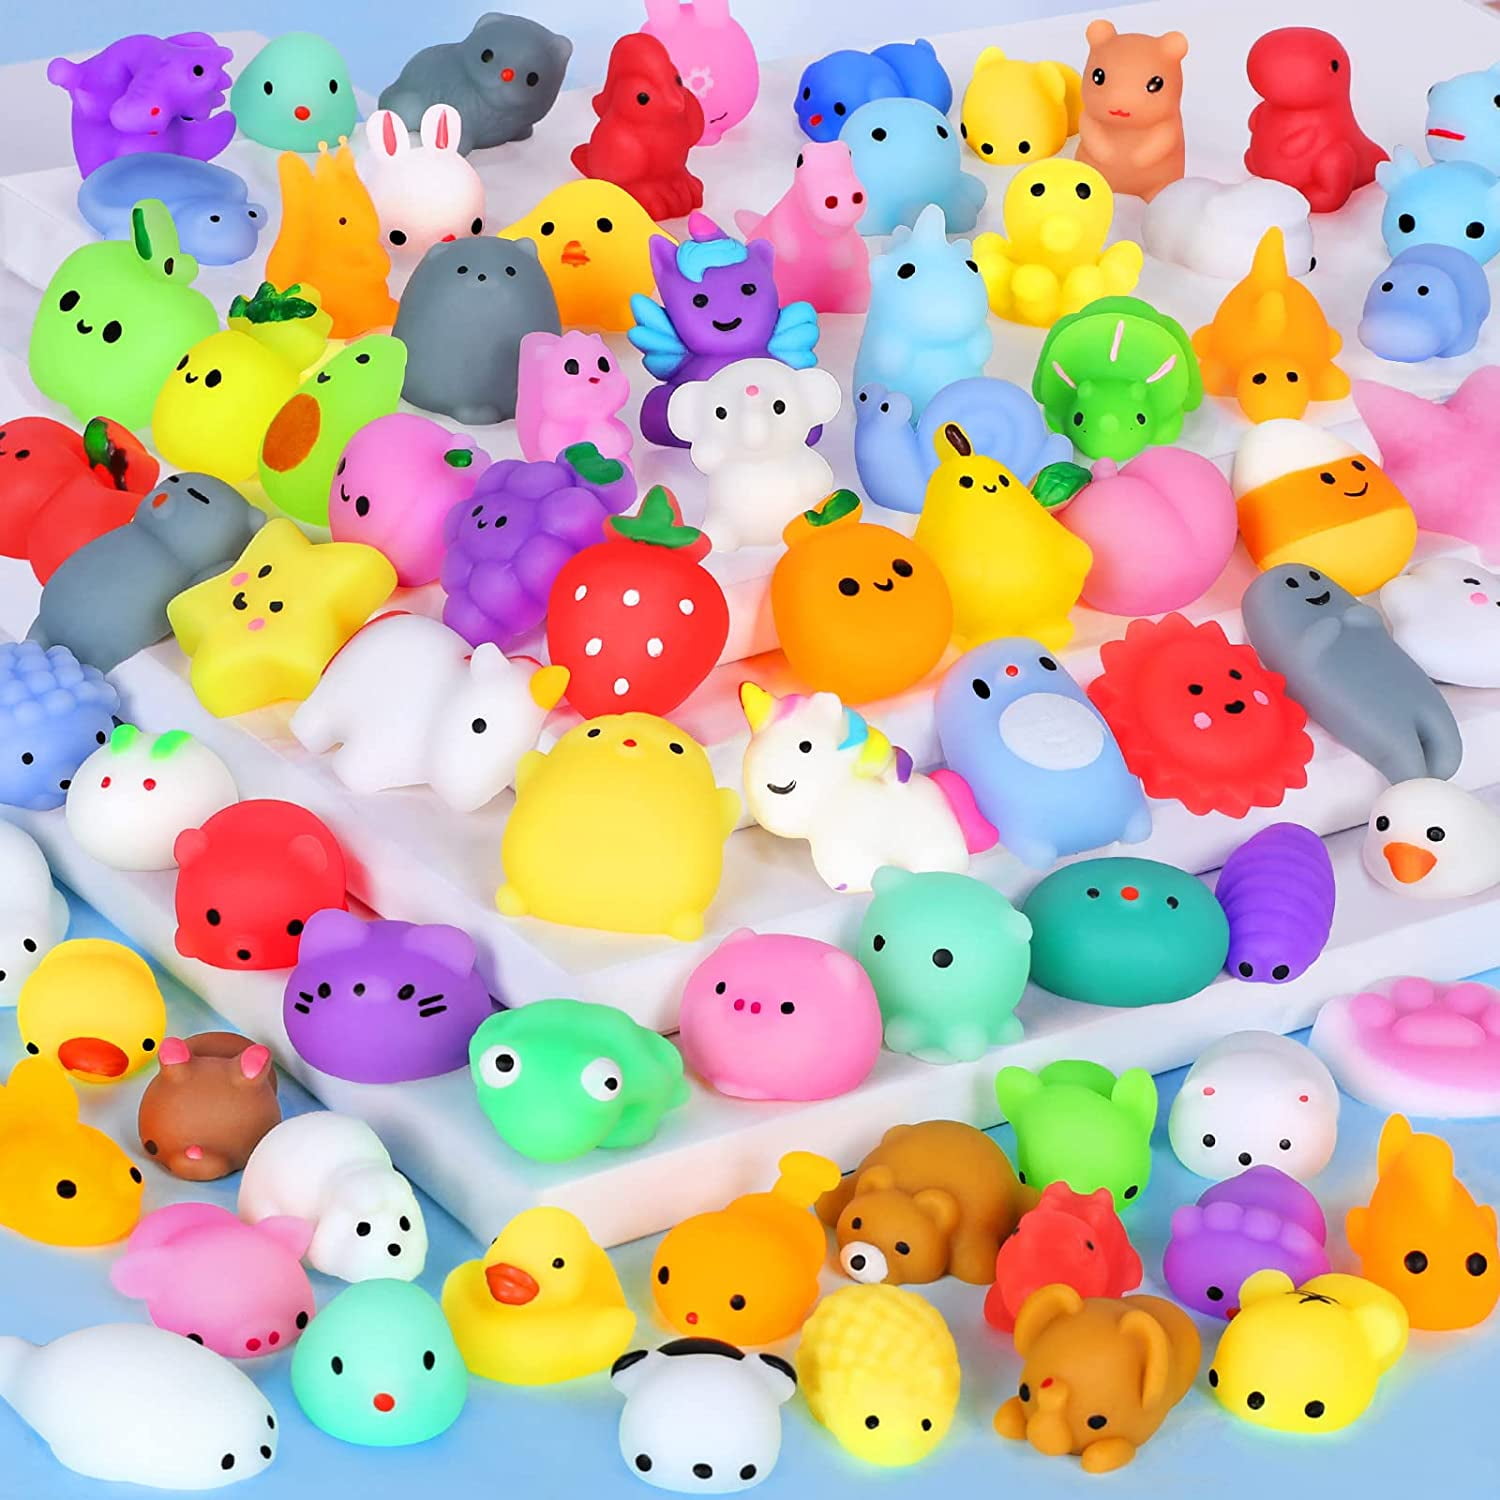 Mini Animal Squishy Pack - 20 Pieces Random Mochi Squishies Party Favor  Toys for Kids - Soft Squeezable Stress Reliever Squeeze stocking fillers